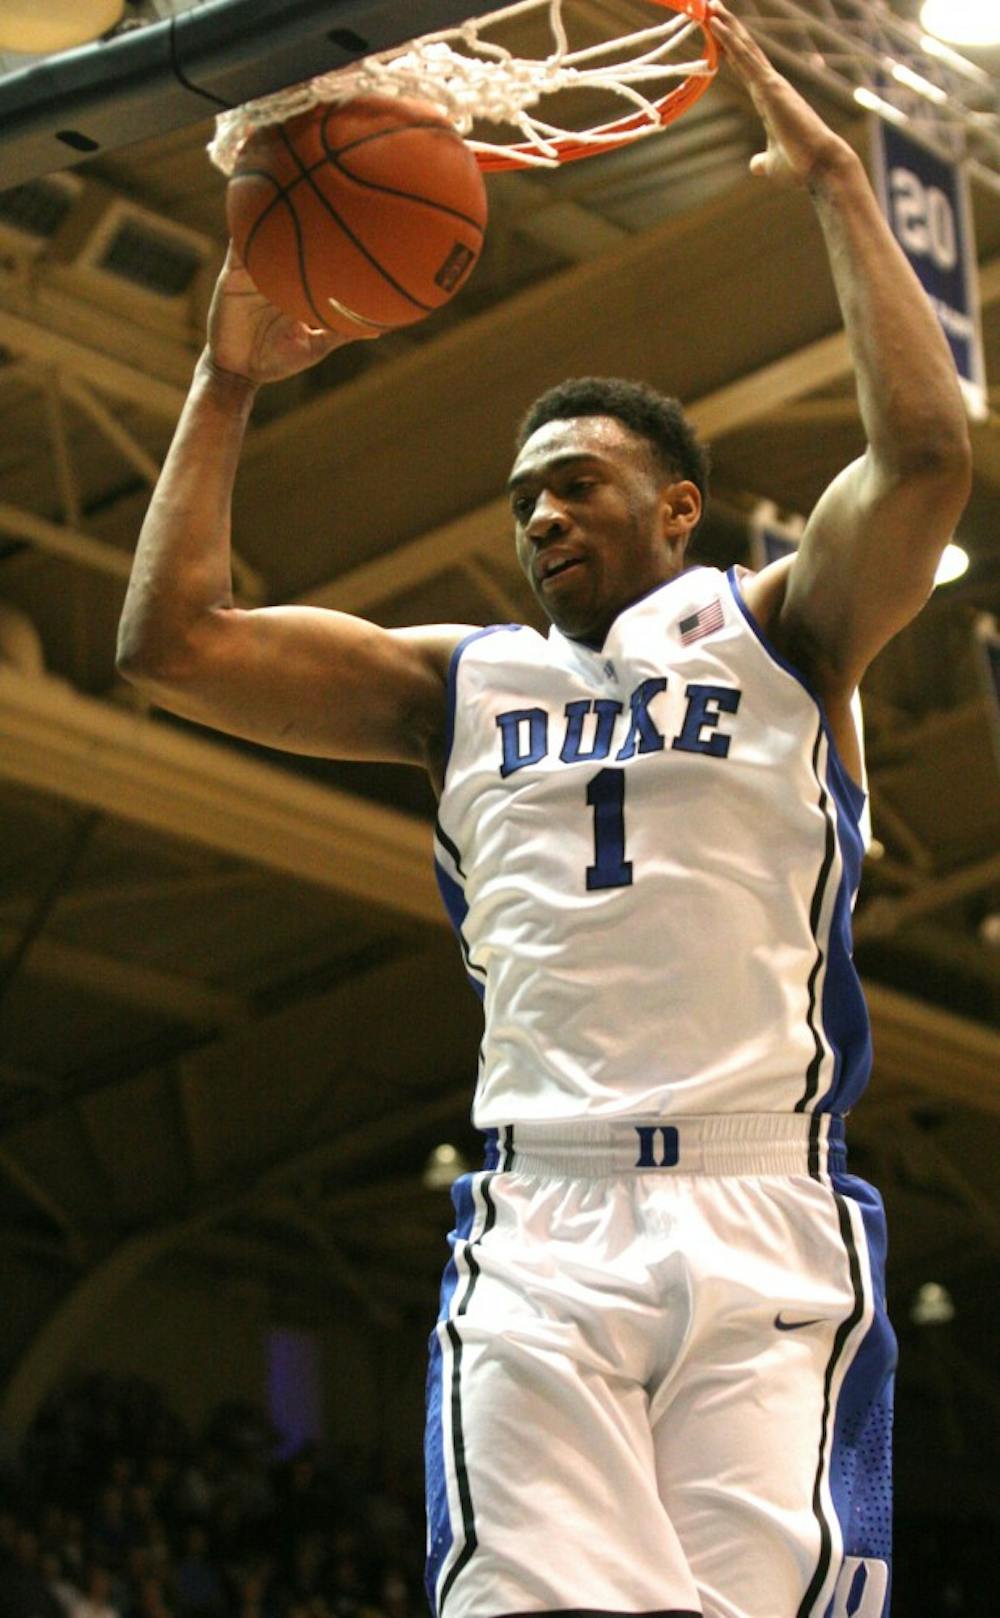 After a relatively slow start at the beginning of the first half, the Blue Devils managed to pick up some momentum and ended the match against the Bowie State Bulldogs 103-67 in their first game of the 2013-2014 season.